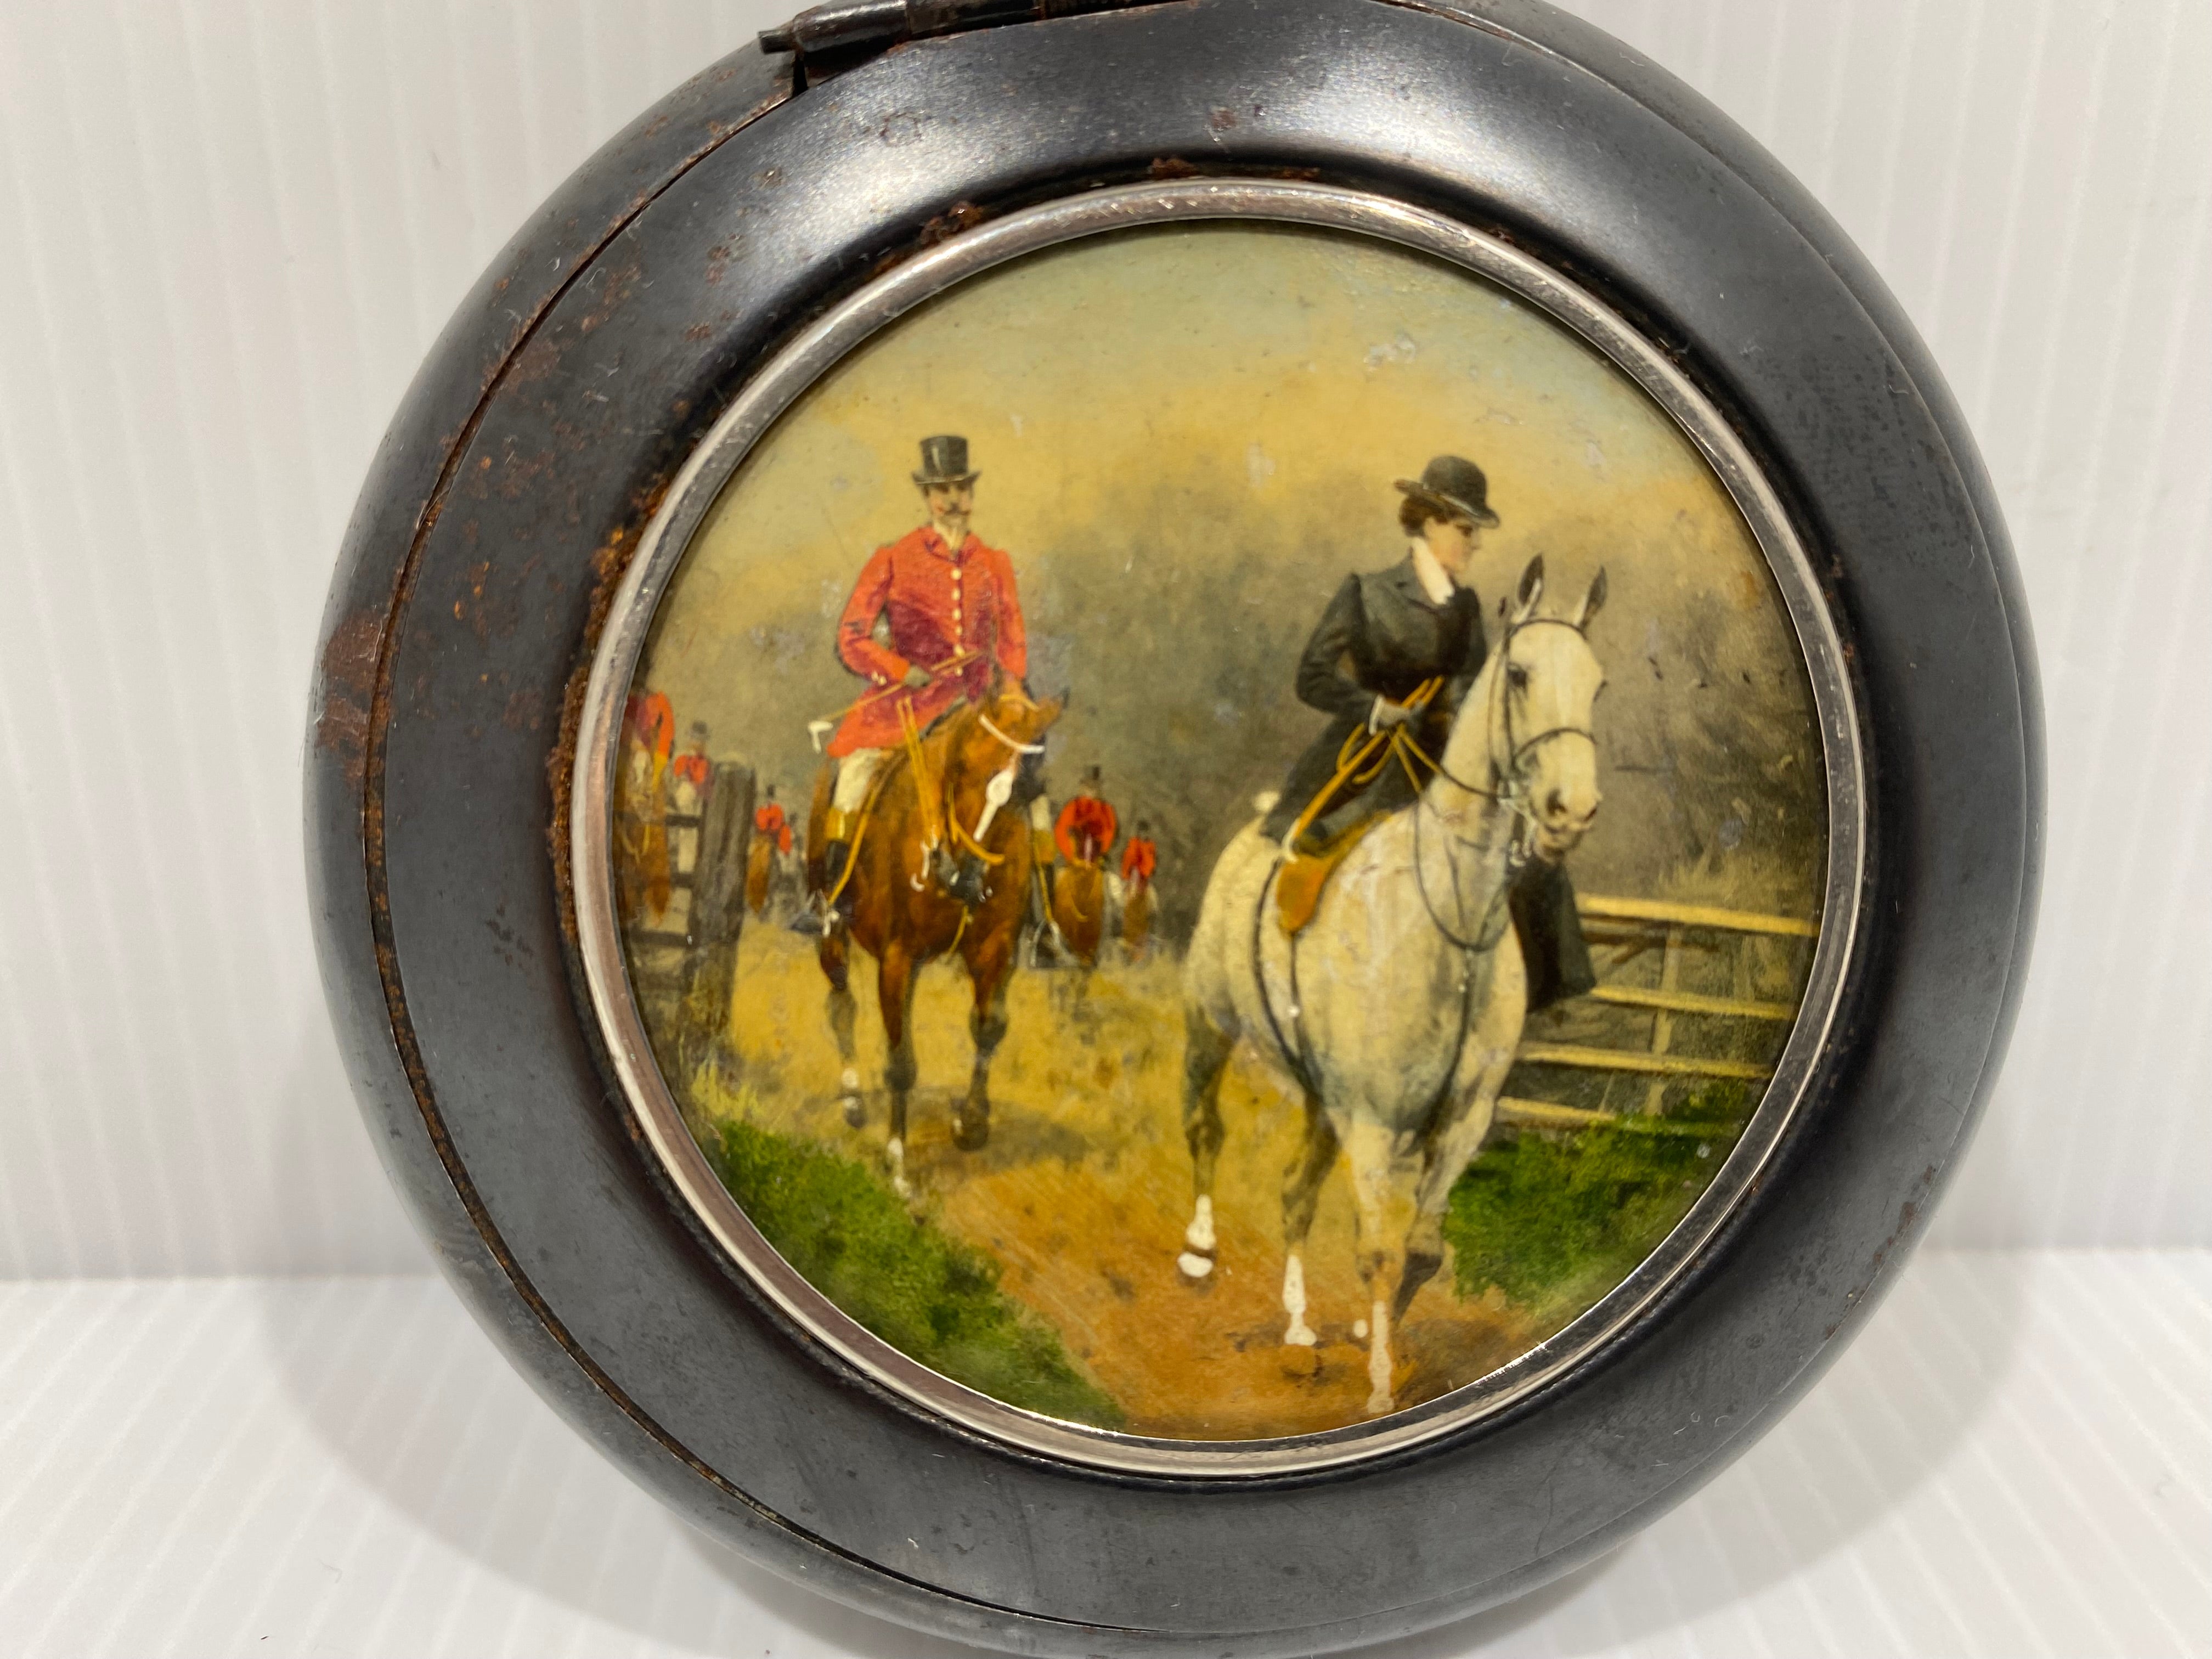 Metallic snuff box, with a hand-painted hunting scene.